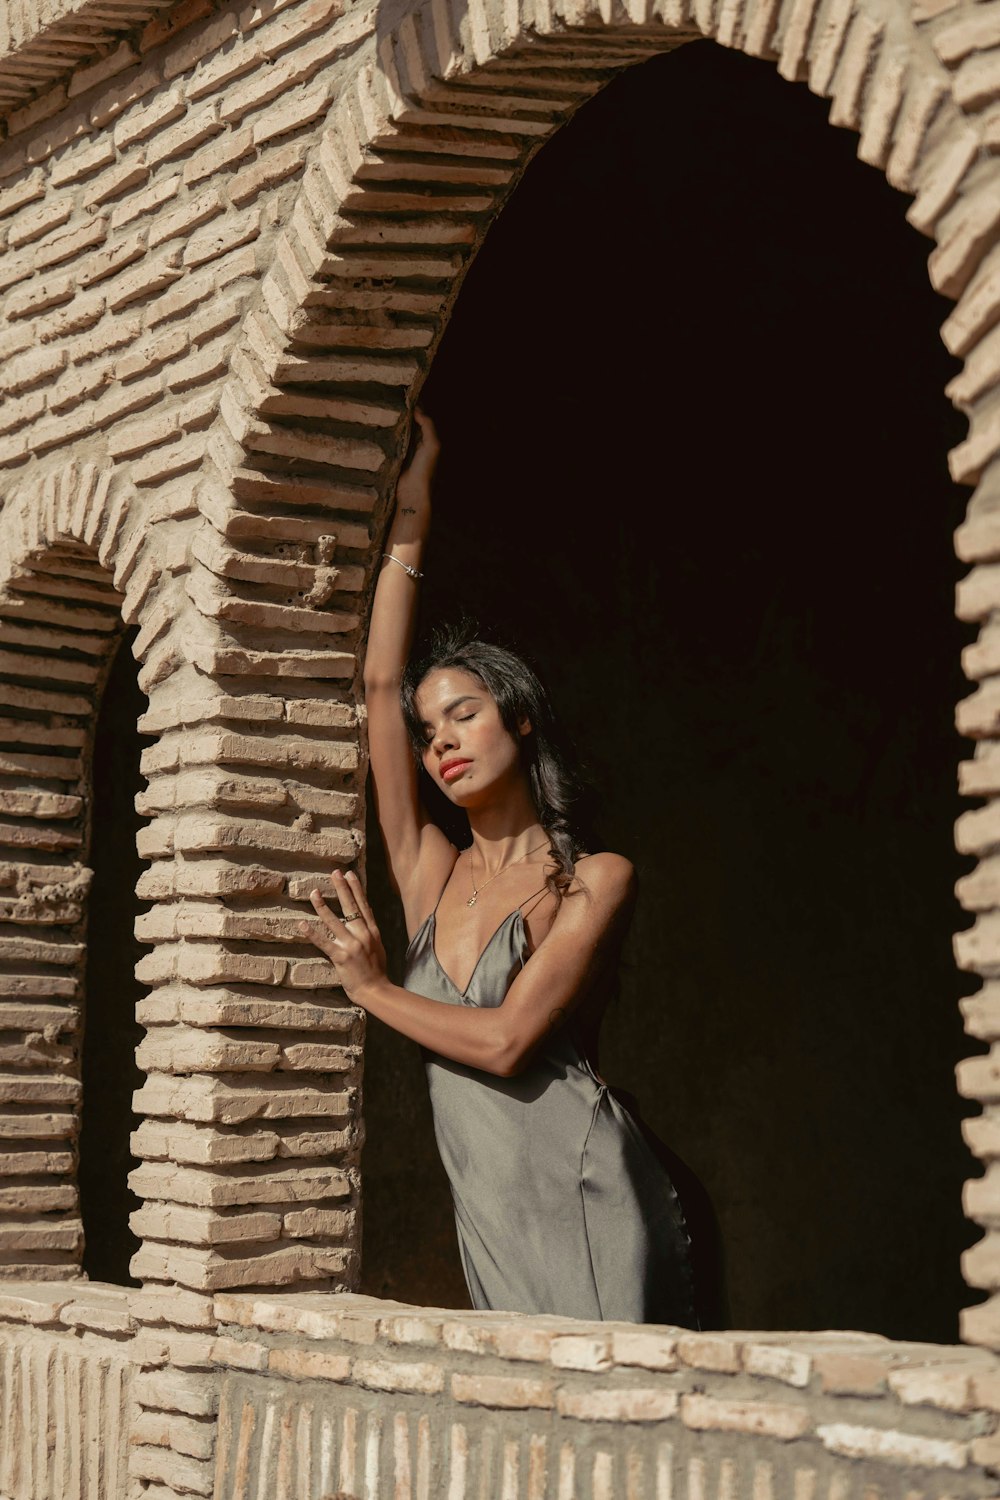 a woman in a gray dress leaning against a brick wall